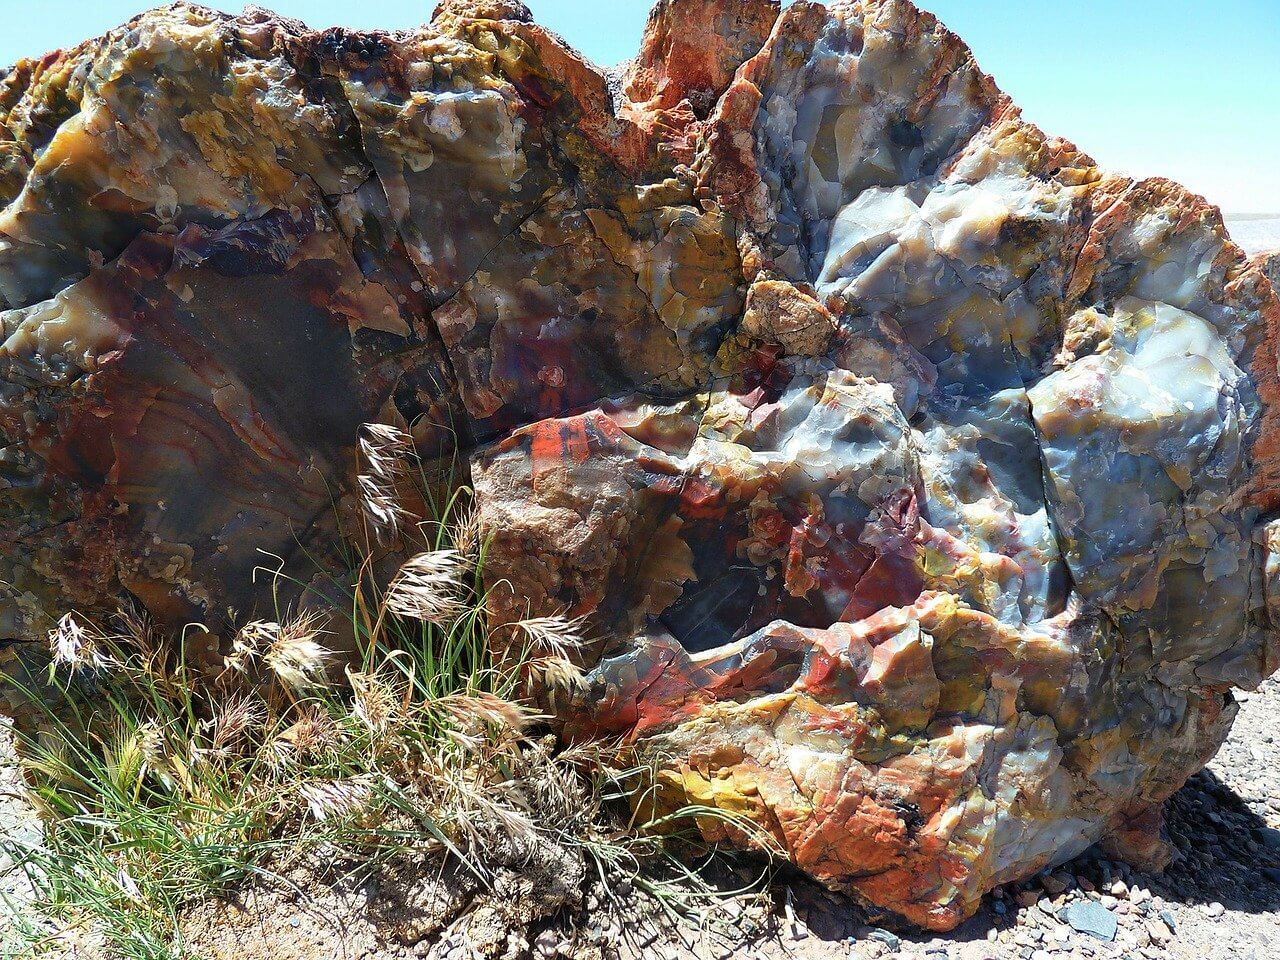 Petrified wood with shades of blue, orange, red, yellow, and brown